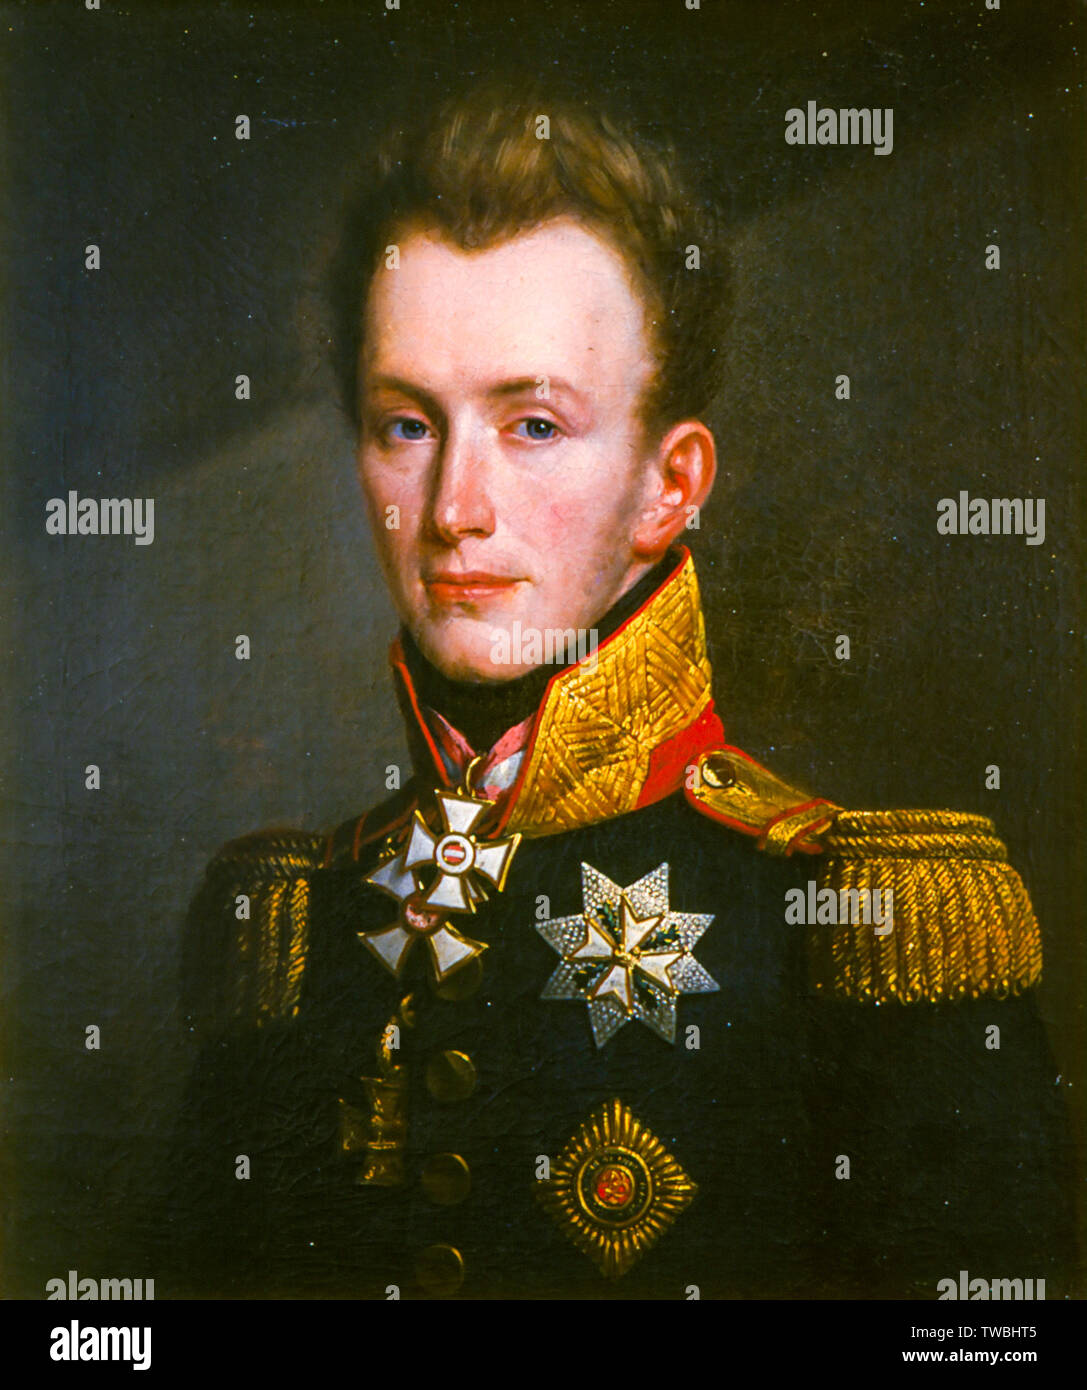 William II of the Netherlands (1792-1849) as a young man at the time of the Battle of Waterloo (1815), portrait painting, 1815 Stock Photo